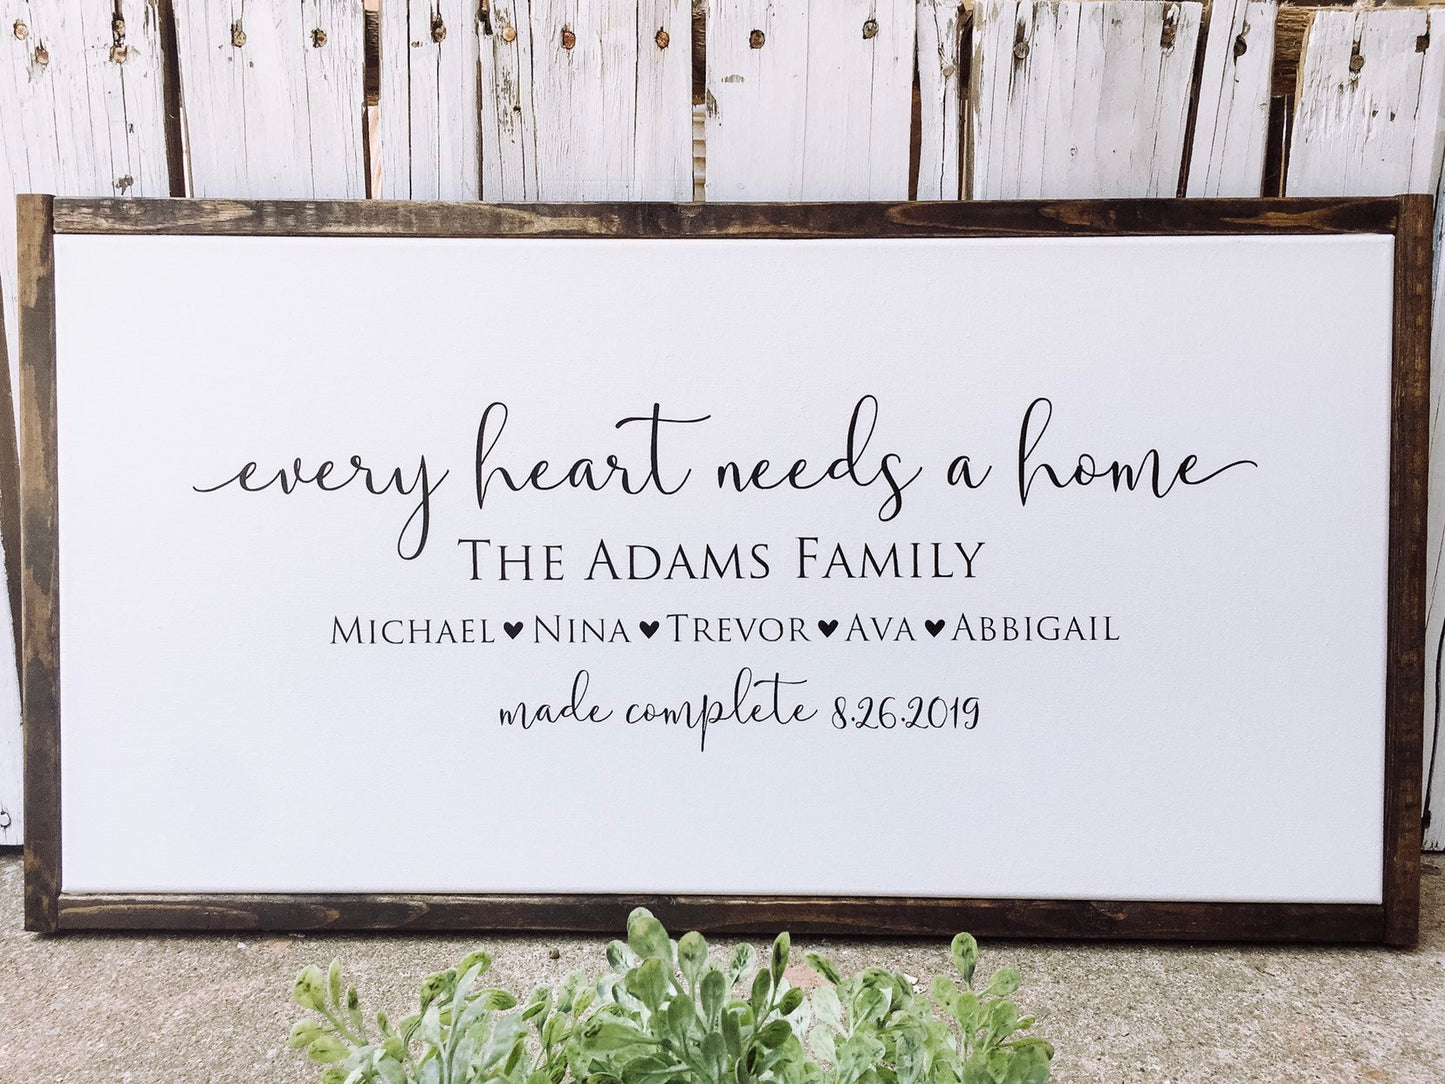 Personalized Adoption Gift, Every Heart Needs A Home, Family Name Sign for Weddings, Gotcha Day, Blended Families, This is Us